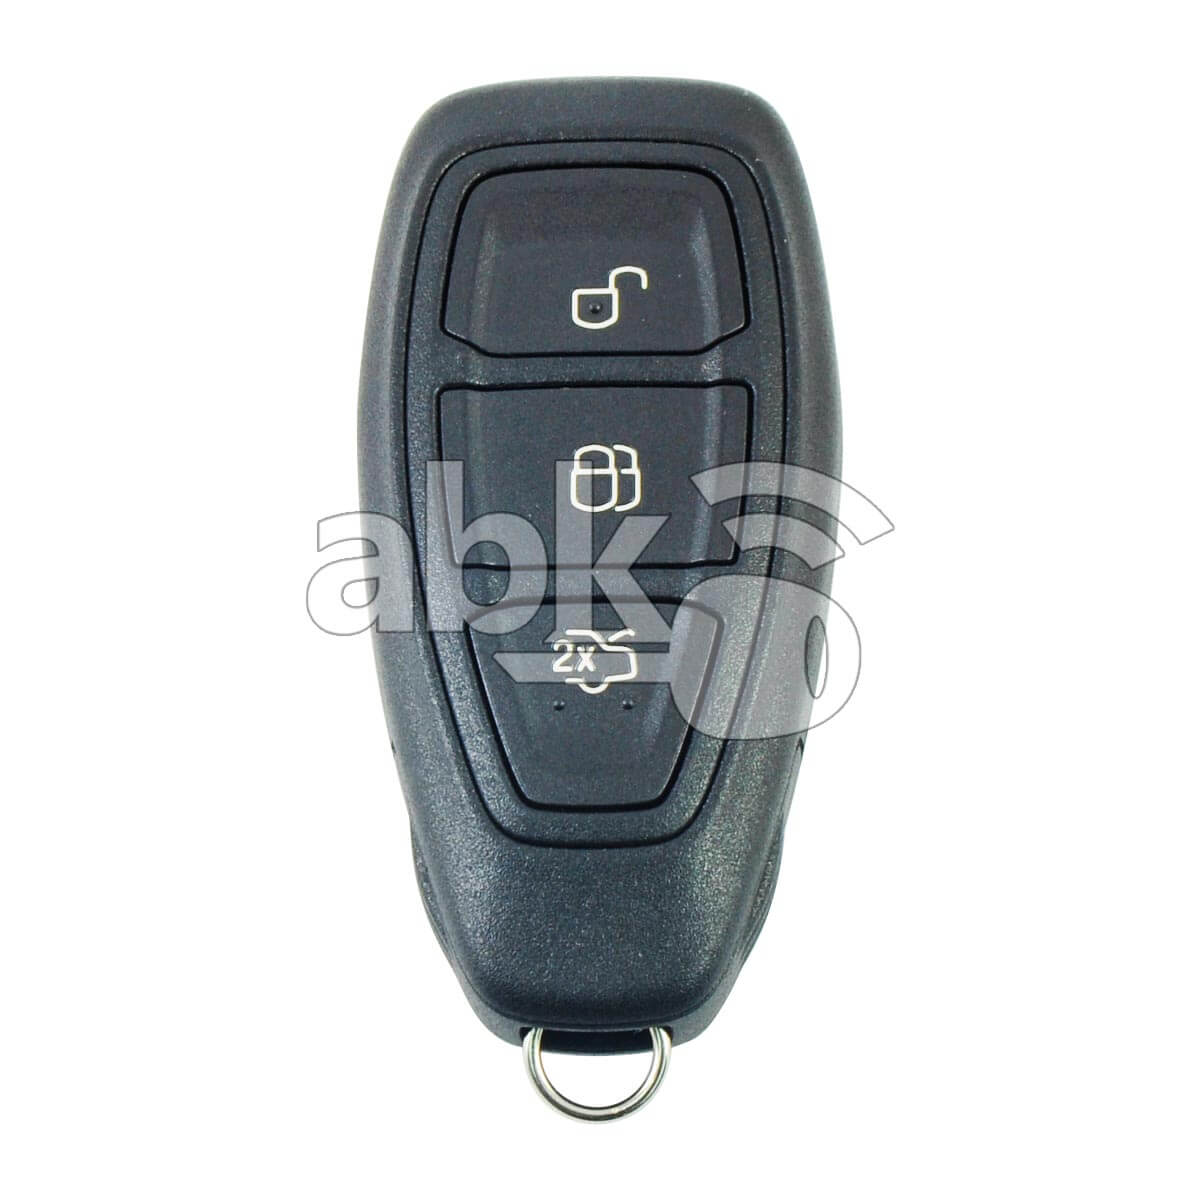 Genuine Ford Focus C-Max 2015+ Smart Key 3Buttons 2178773 1925235 433MHz KR5876268 - ABK-2397 -